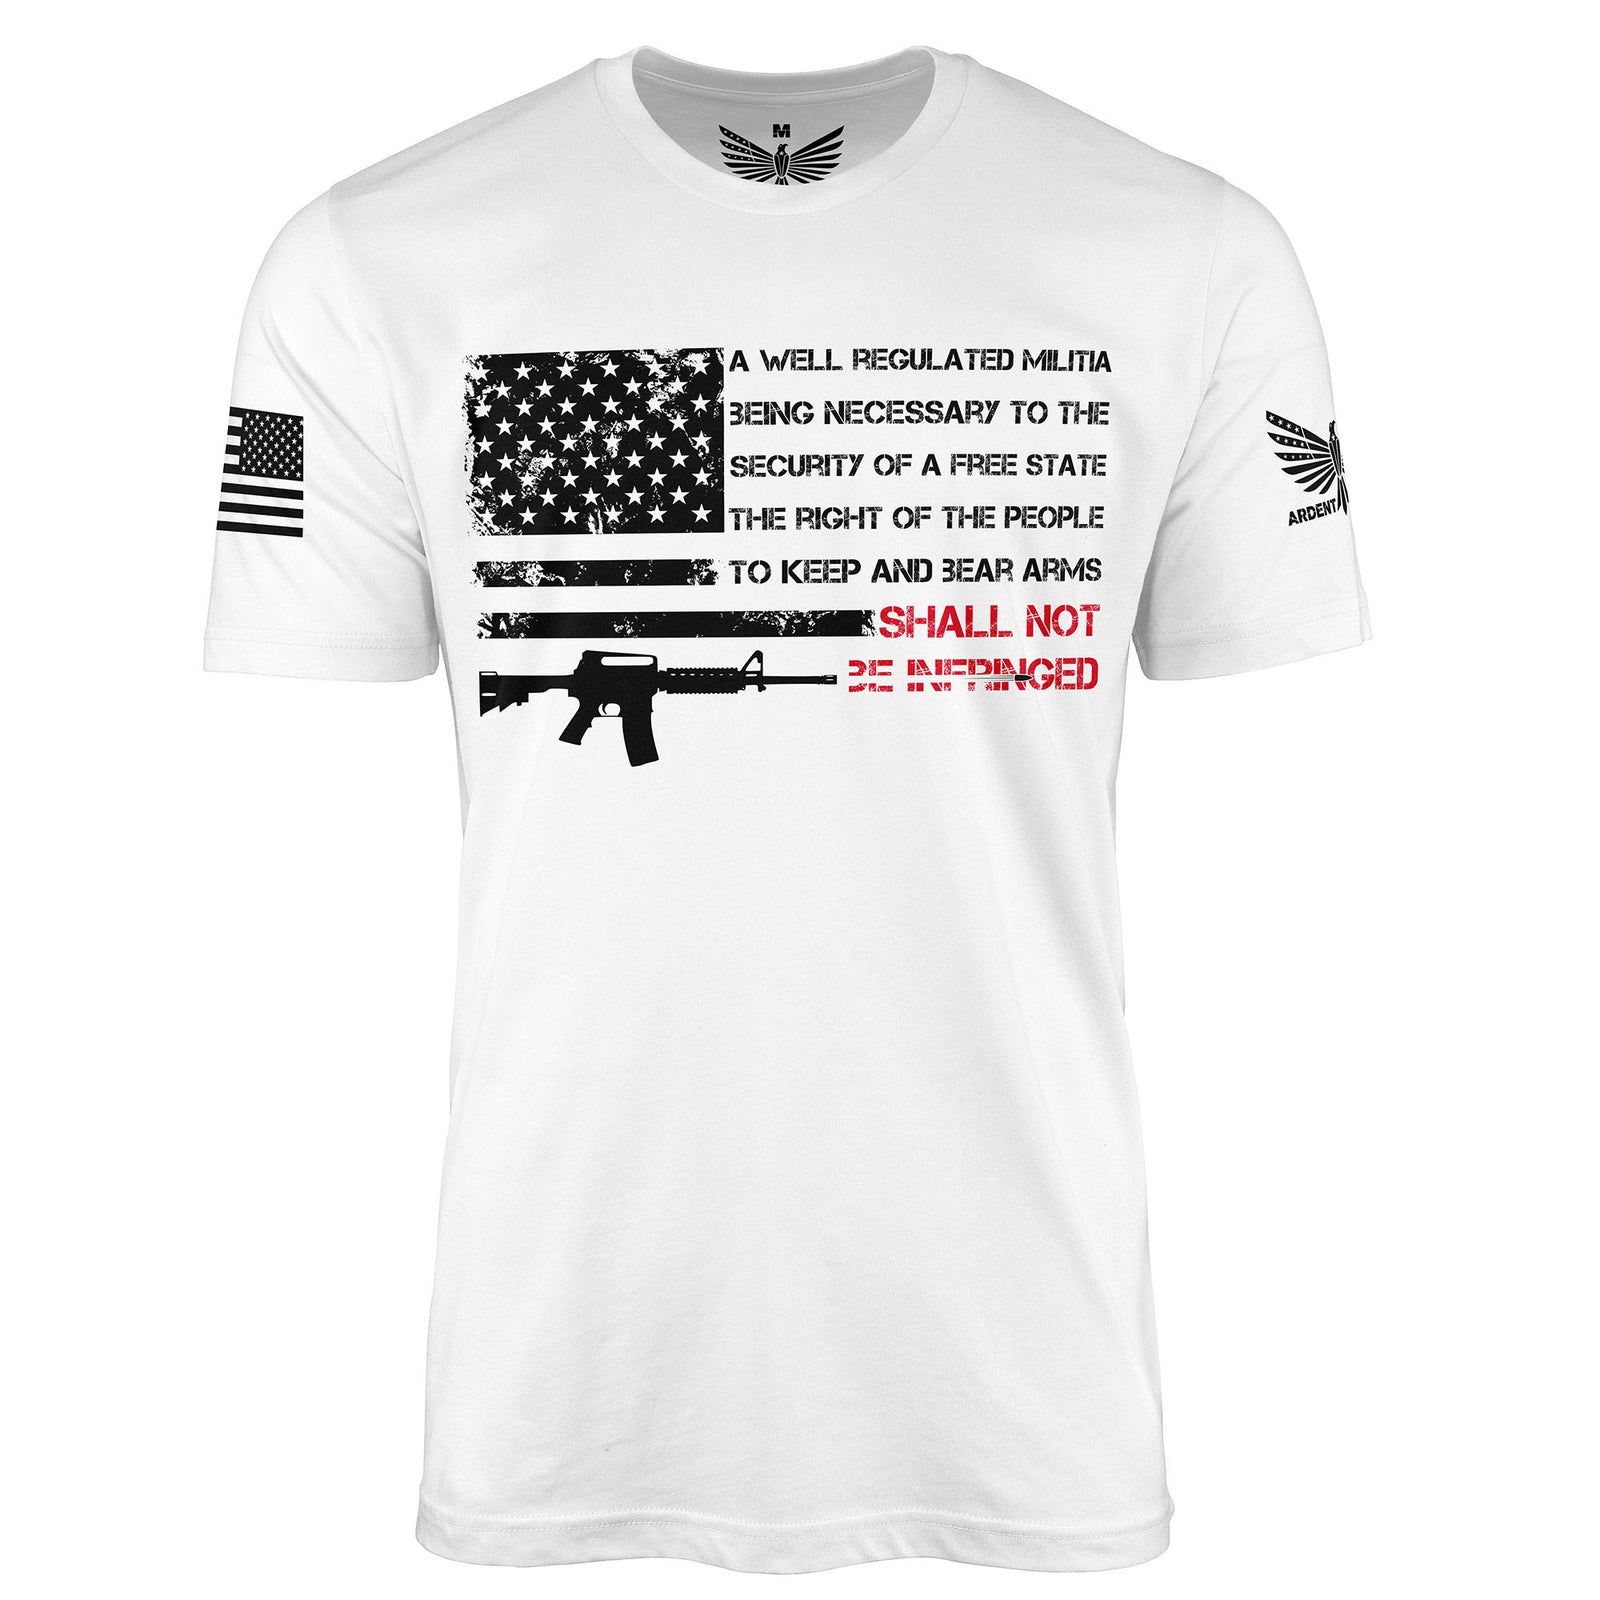 Shall Not Be Infringed-Men's Shirt-White-S-Ardent Patriot Apparel Co.